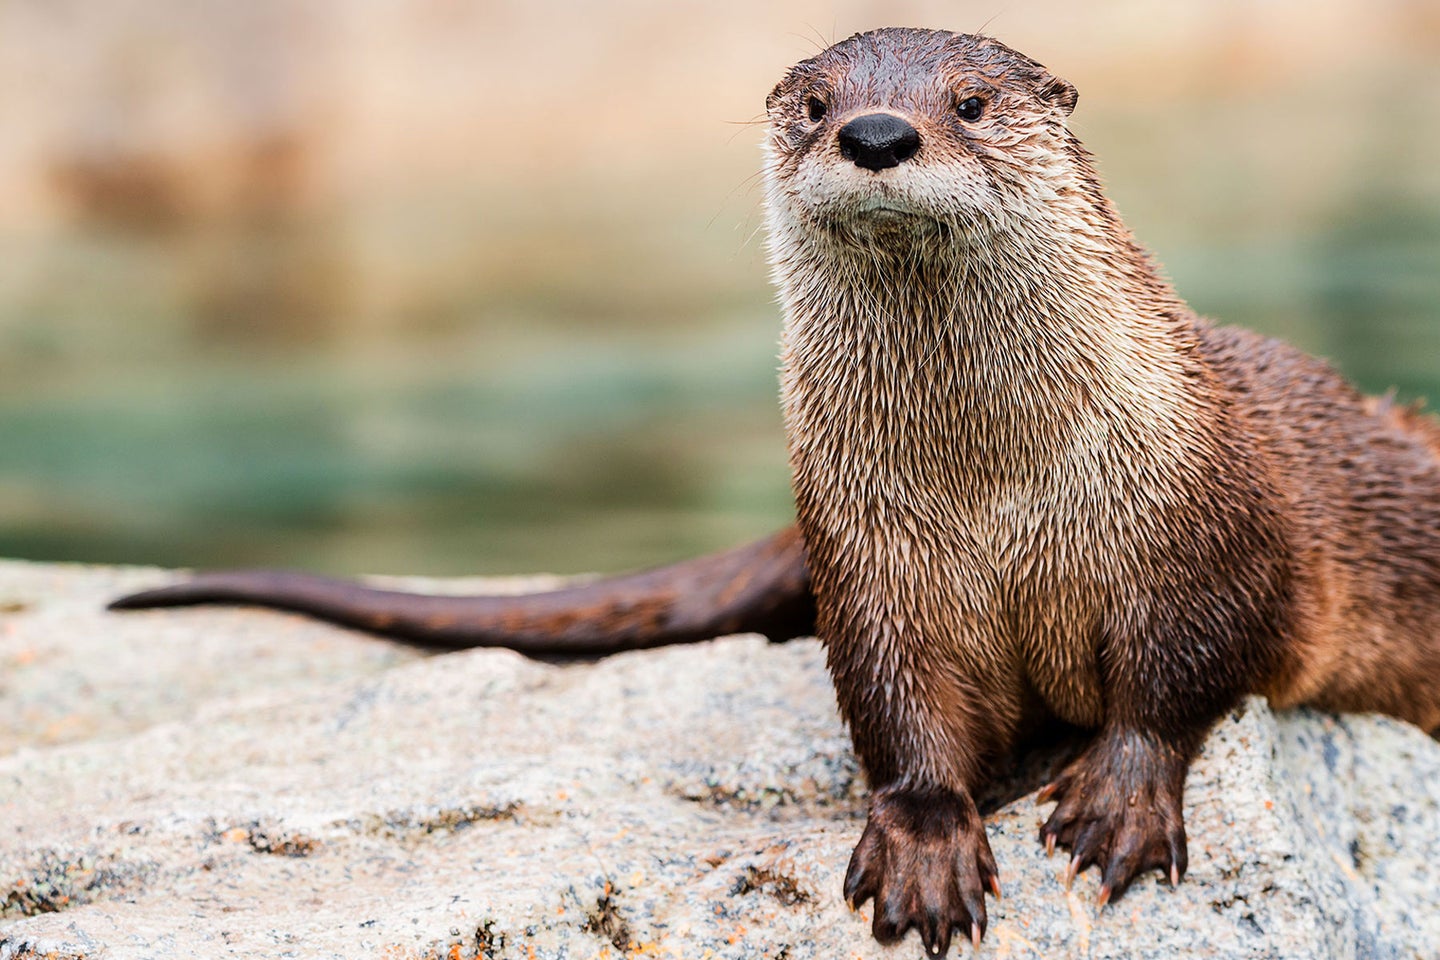 Otters can be aggressive in rare instances when protecting their young or defending territory. 